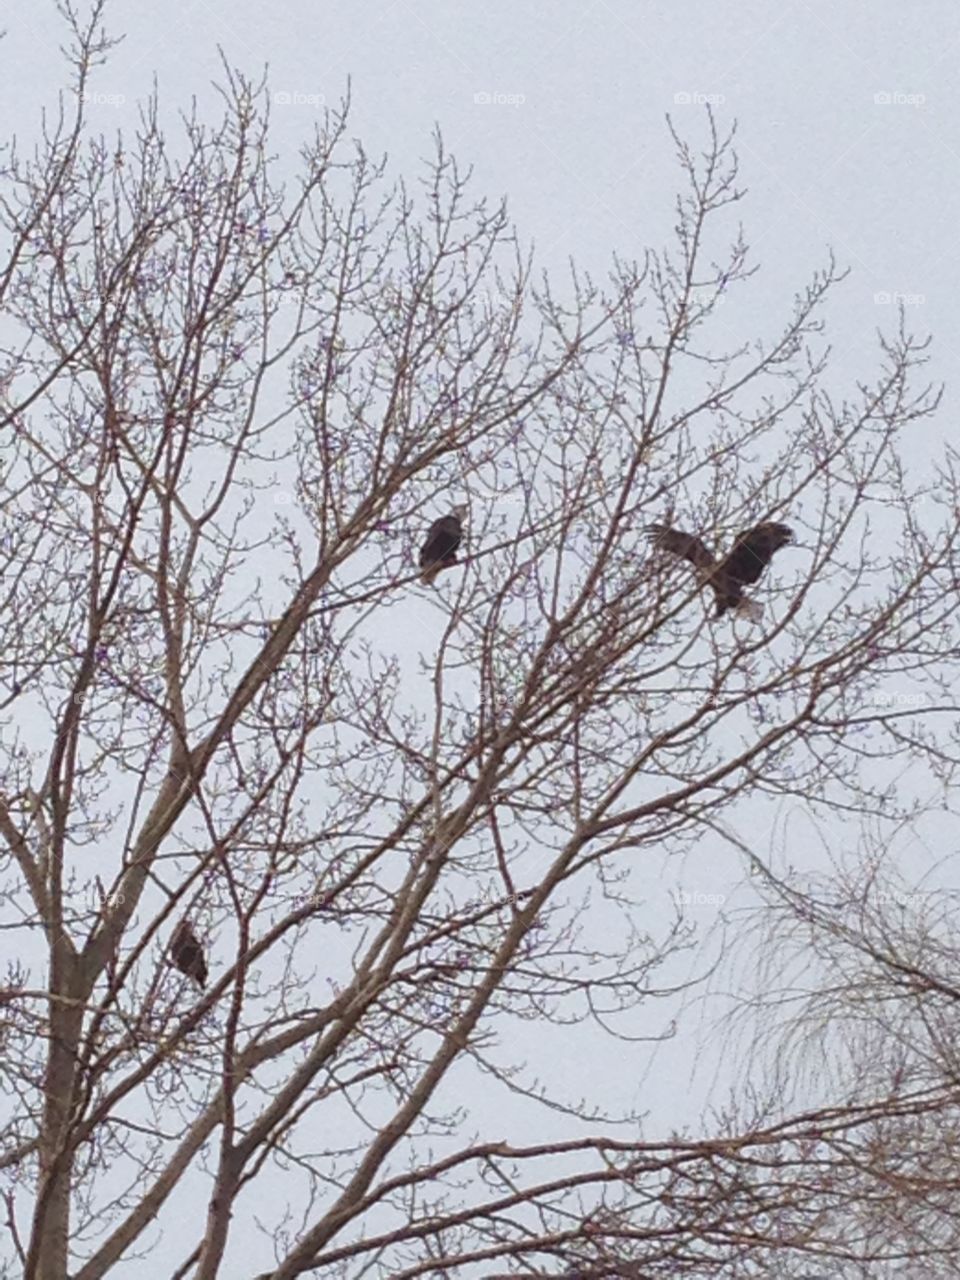 Eagles in a tree, Ladner, BC, Canada.